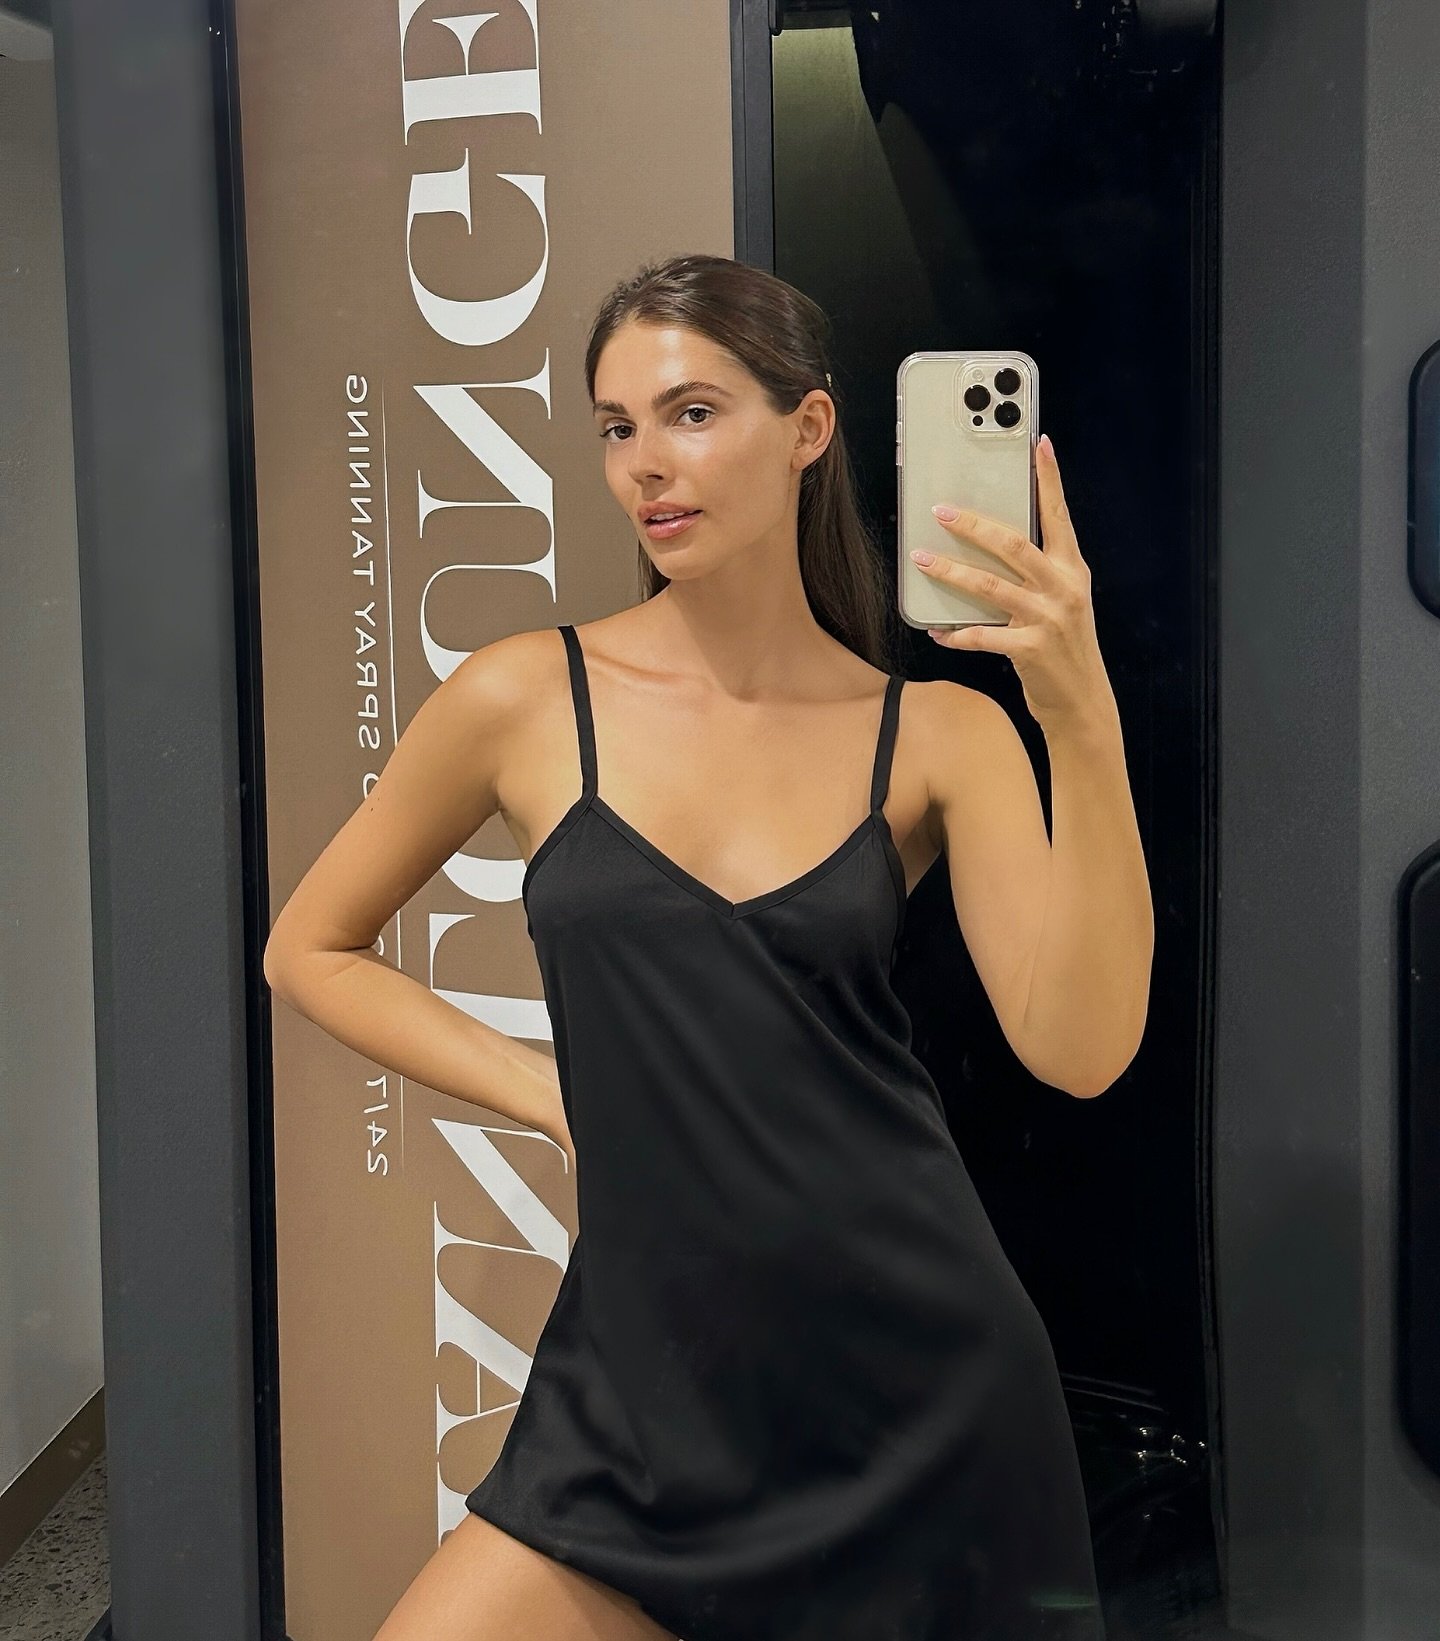 Loving @coriwood post tan look in a gorgeous tanning dress &amp; fresh coat of Golden Globes ✨🤎

Get the look and glow with us - grab your own tanning dress from the vending machine 🫶🏽

#tanlounge #tanloungegoldcoast #automatedspraytan #sunlesstan